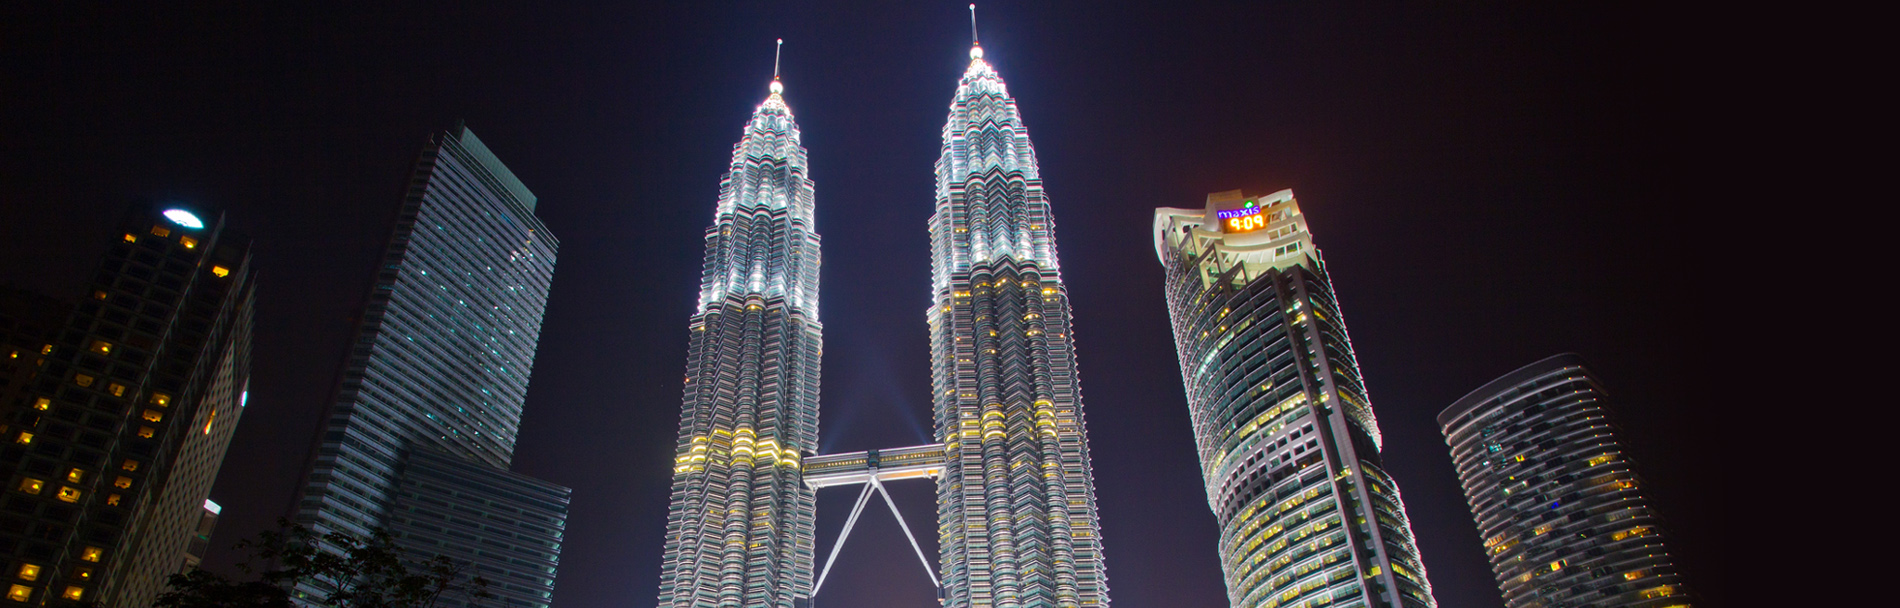 Malaysia Tour Package - 6 Nights